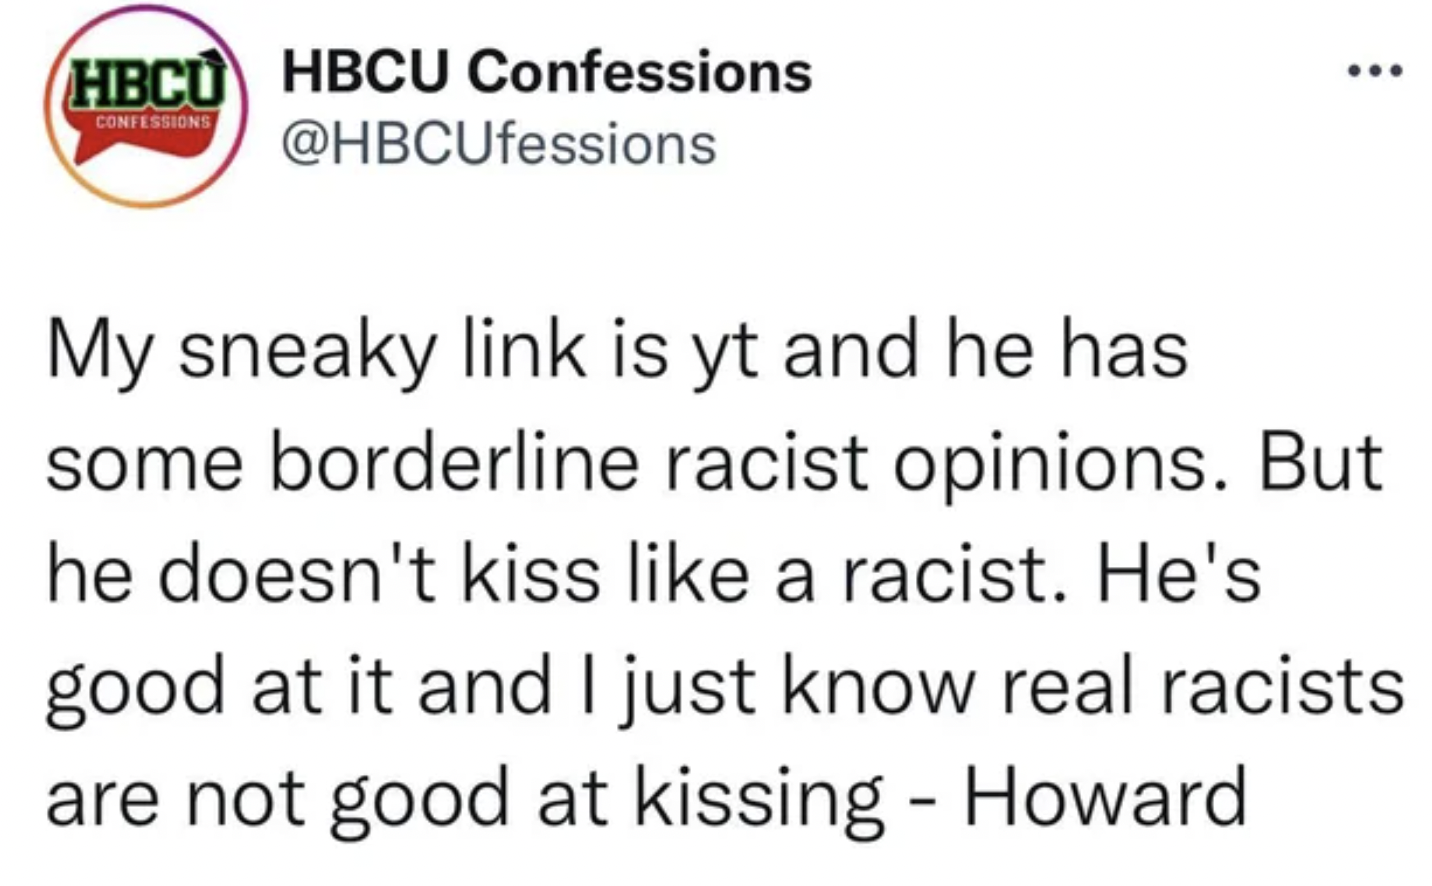 Facepalms - My sneaky link is yt and he has some borderline racist opinions. But he doesn't kiss a racist. He's good at it and I just know real racists are not good at kissing